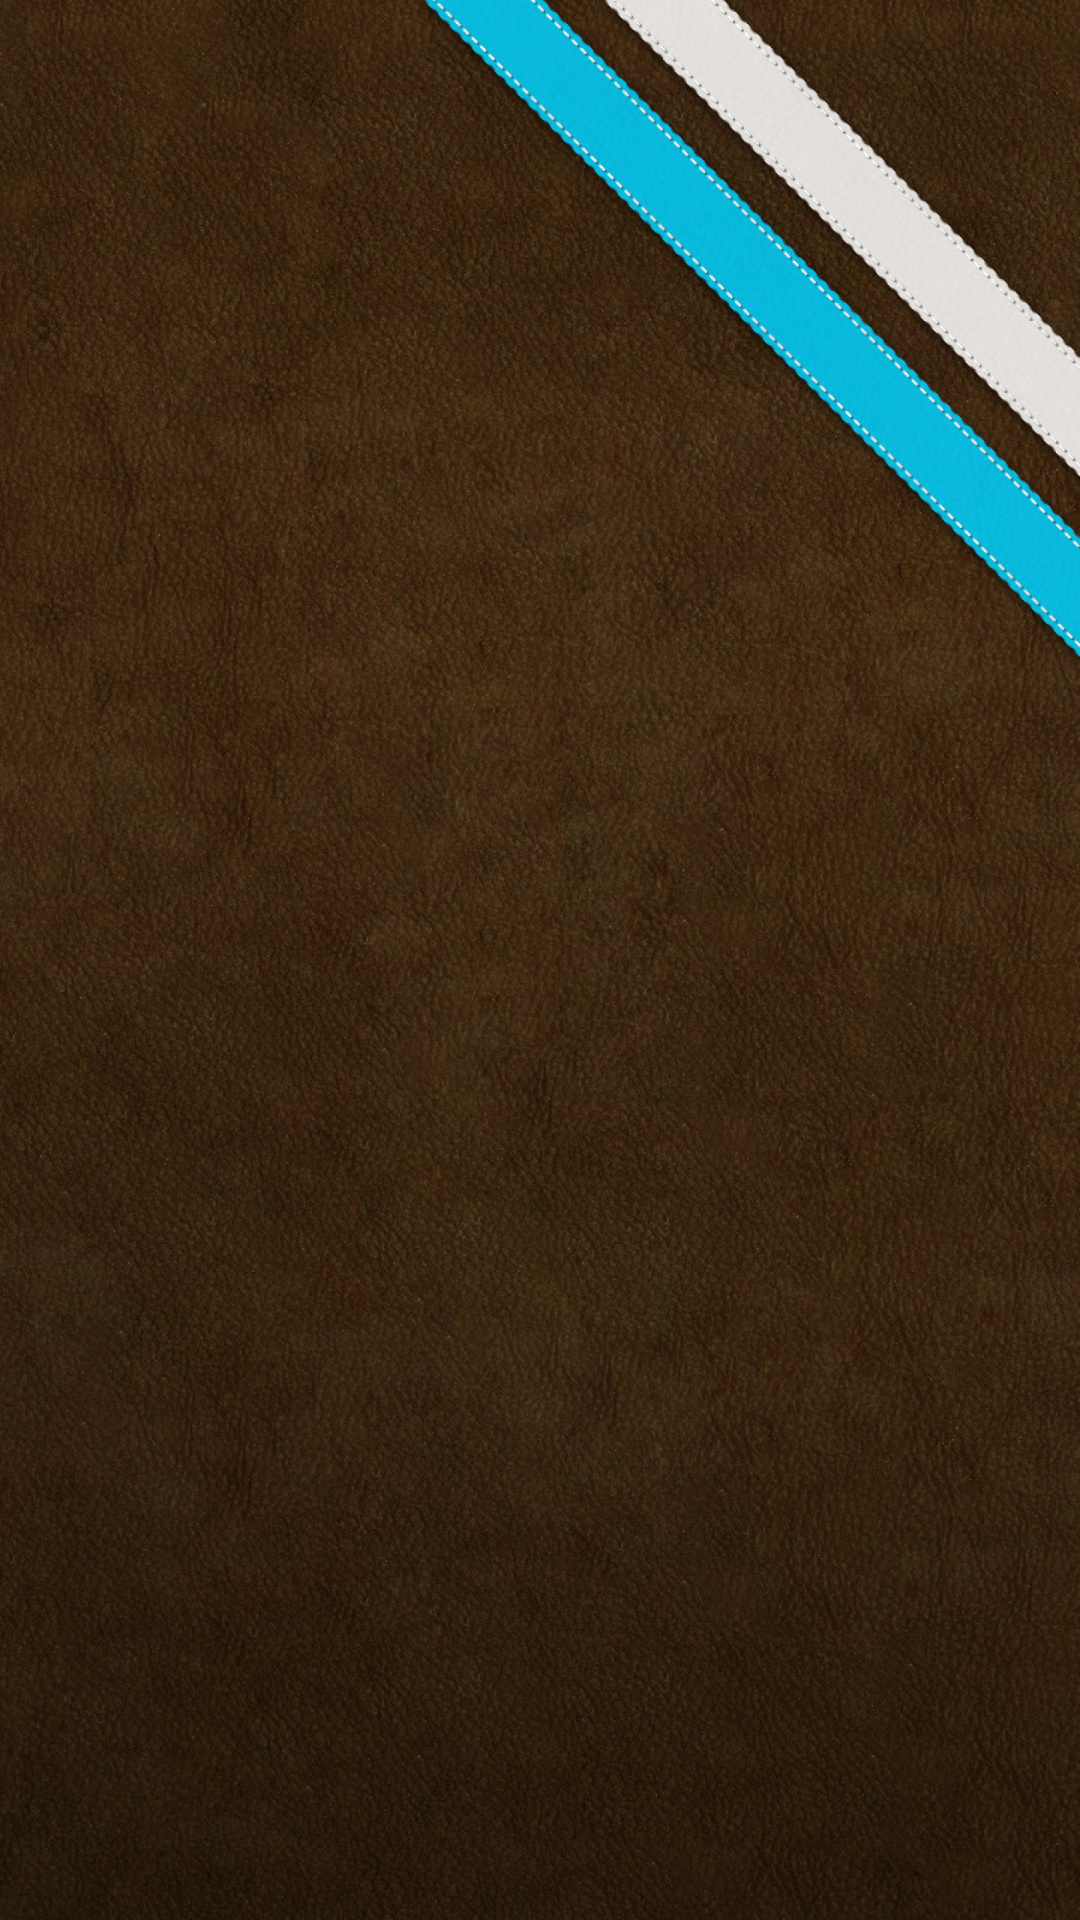 Brown Leather Background screenshot #1 1080x1920